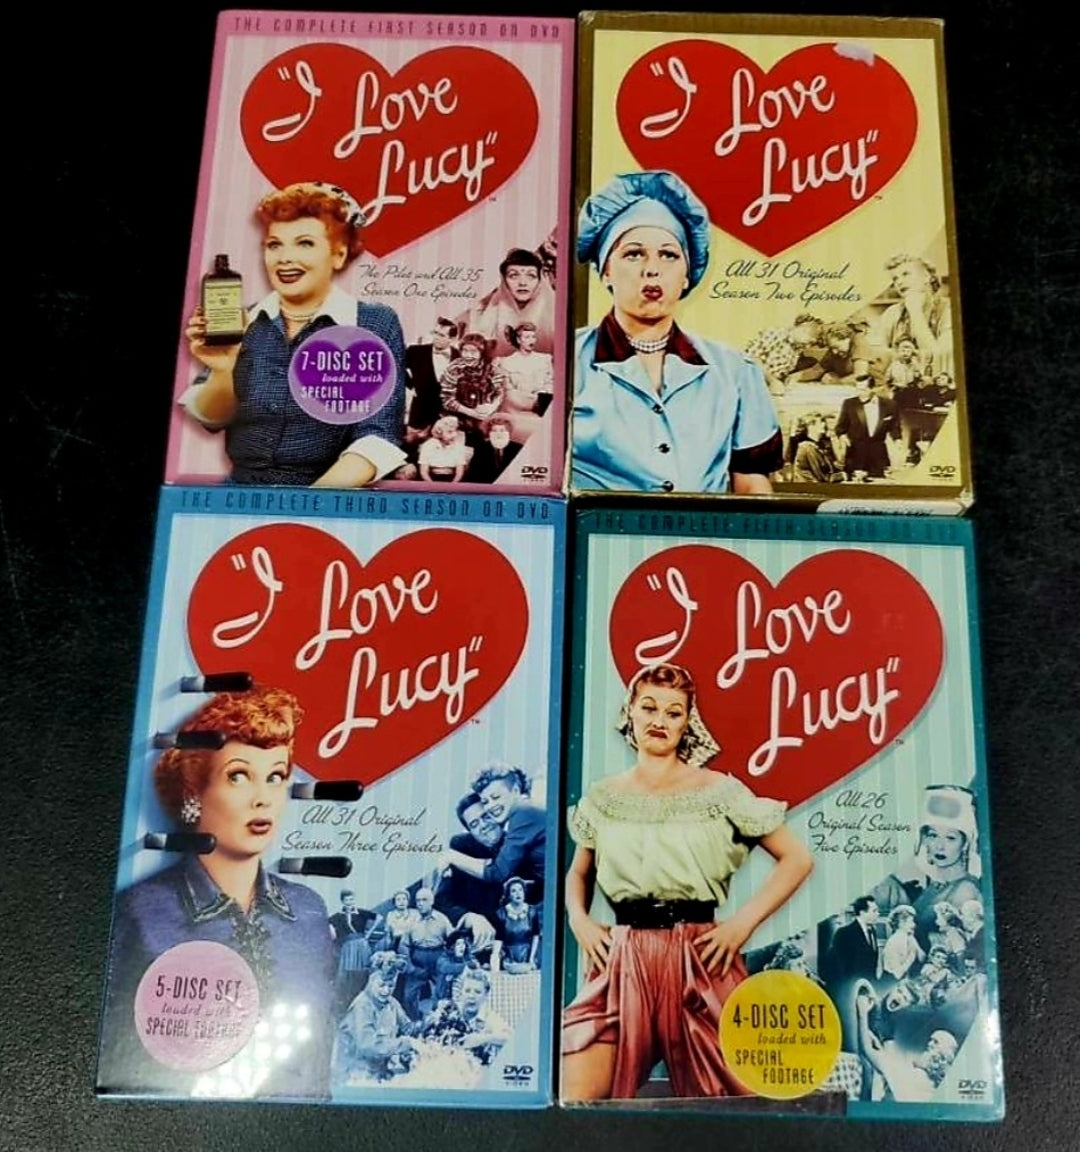 NIB *Ready to Laugh? "I LOVE LUCY" Complete Seasons 1-3, 5